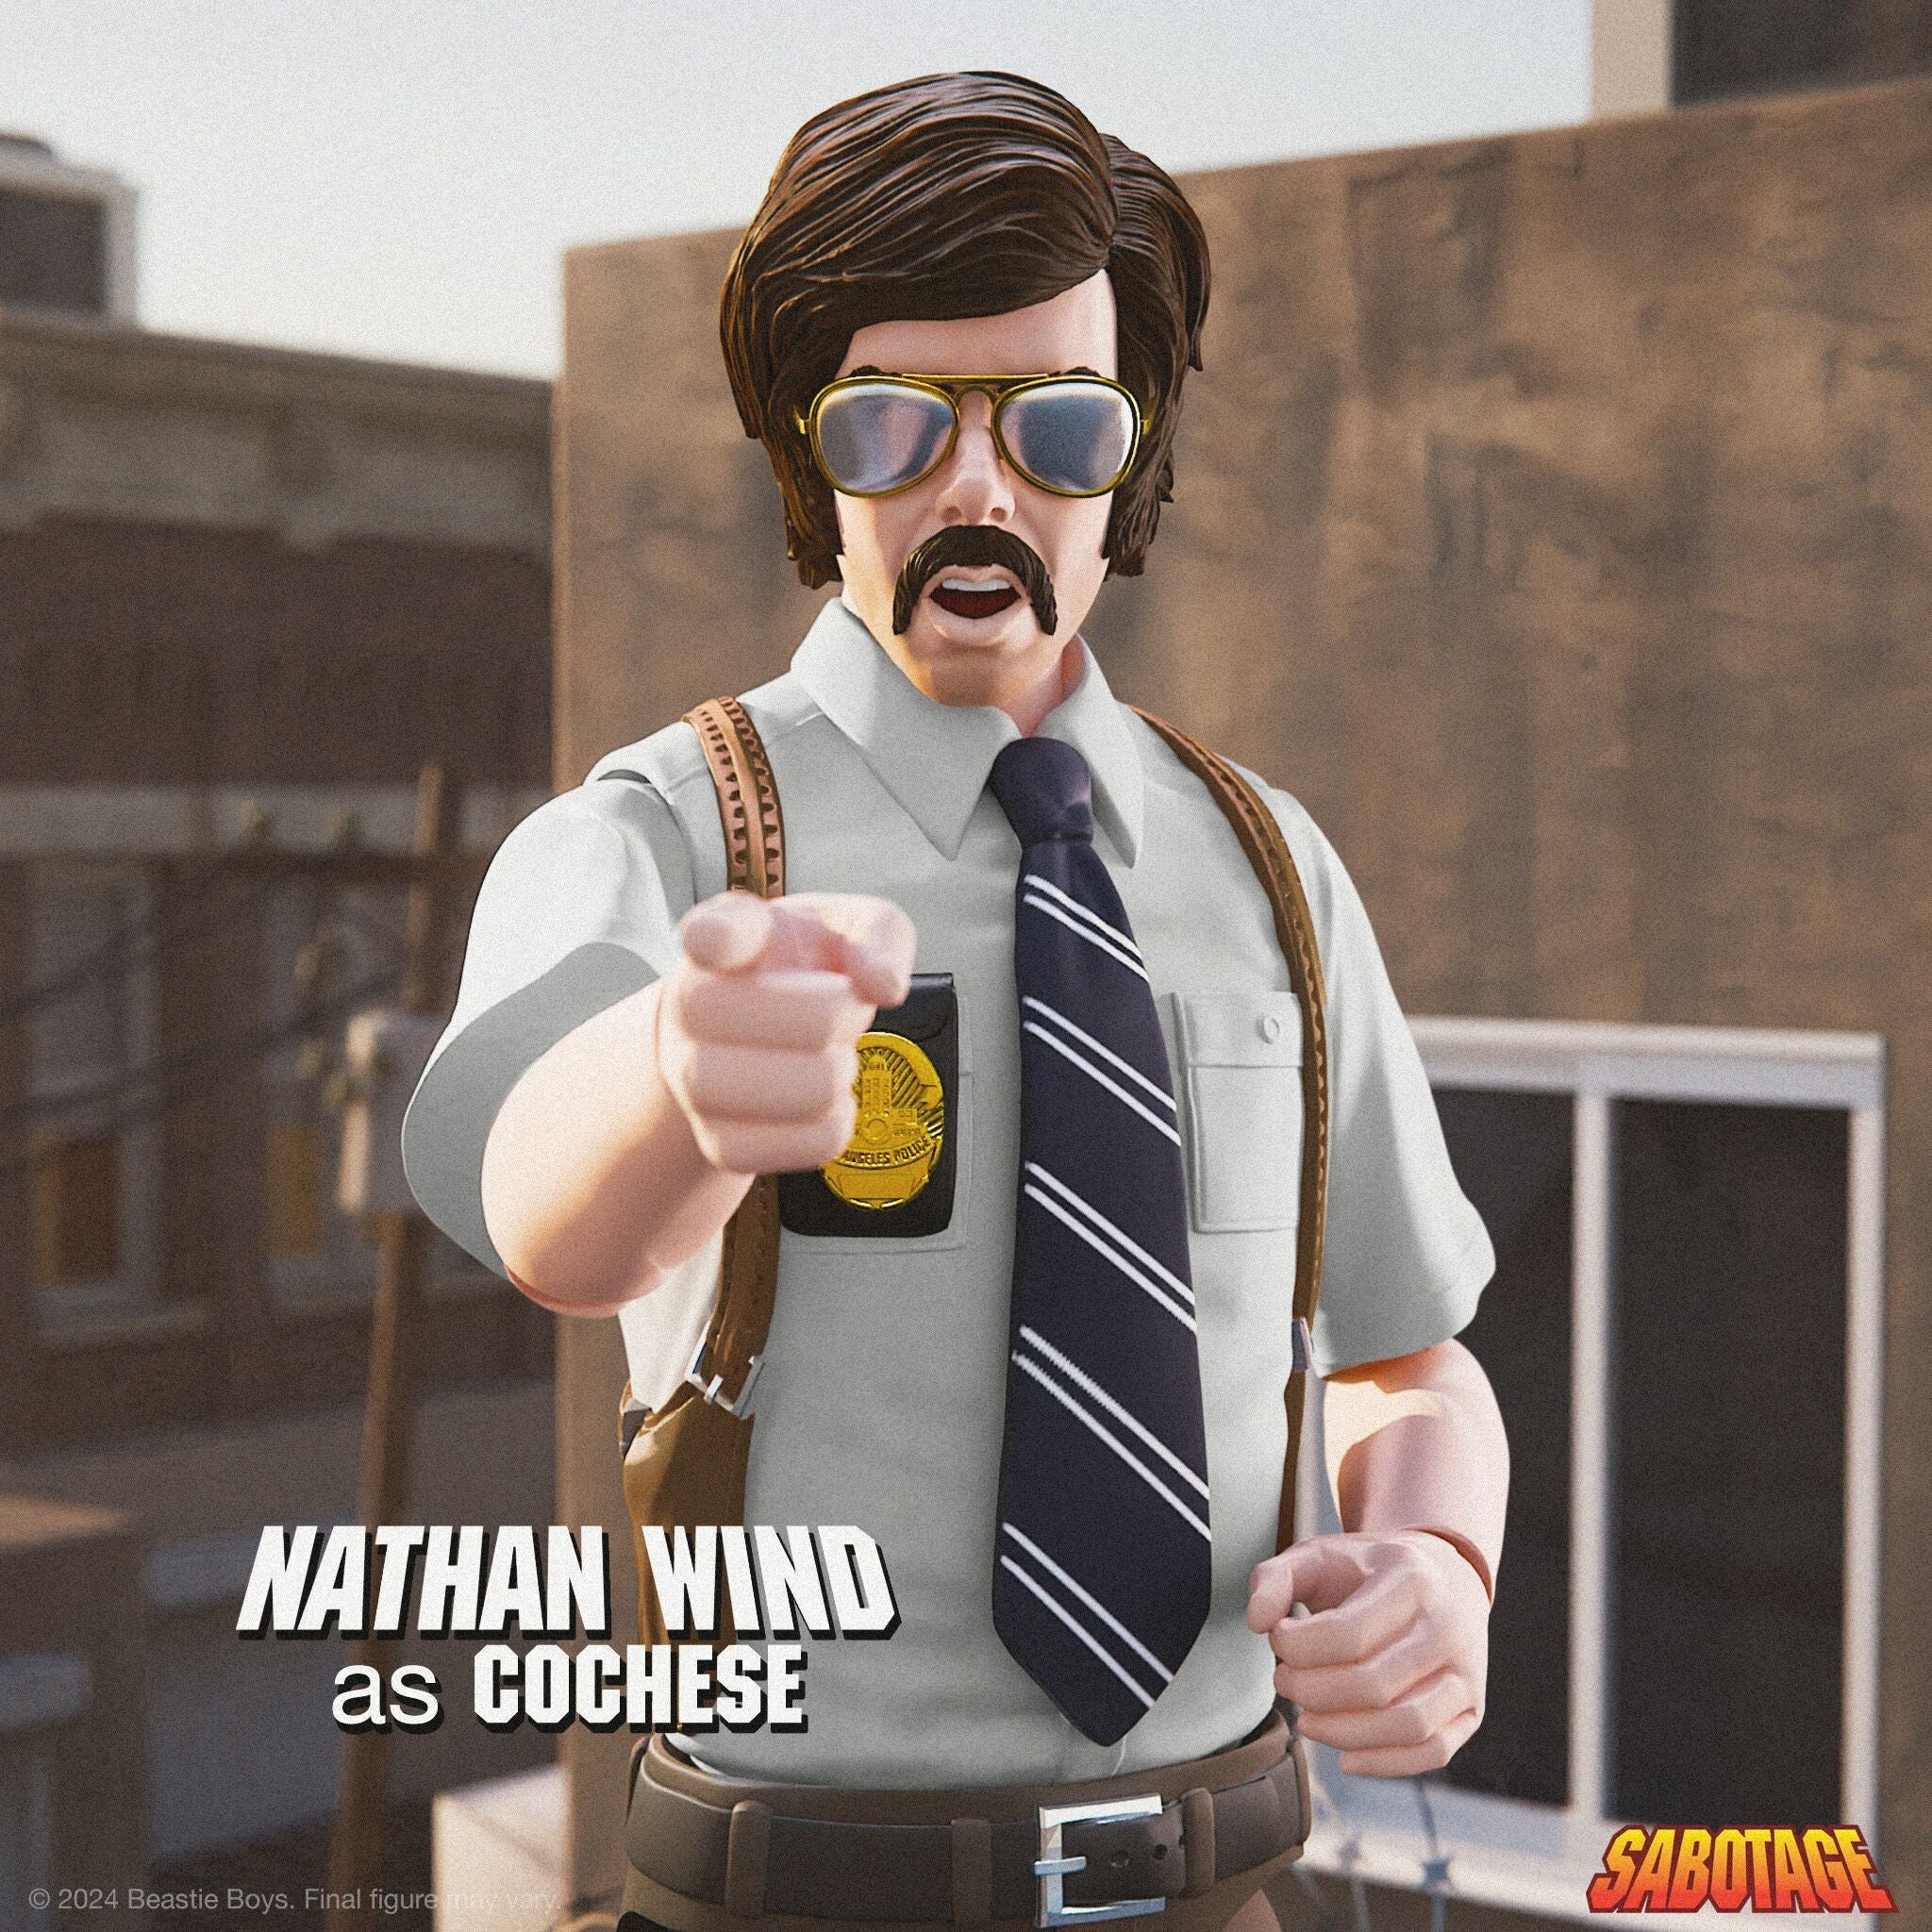 Super7 - Beastie Boys ULTIMATES! - Wave 1 - Sabotage: Nathan Wind as Cochese (MCA) - Marvelous Toys